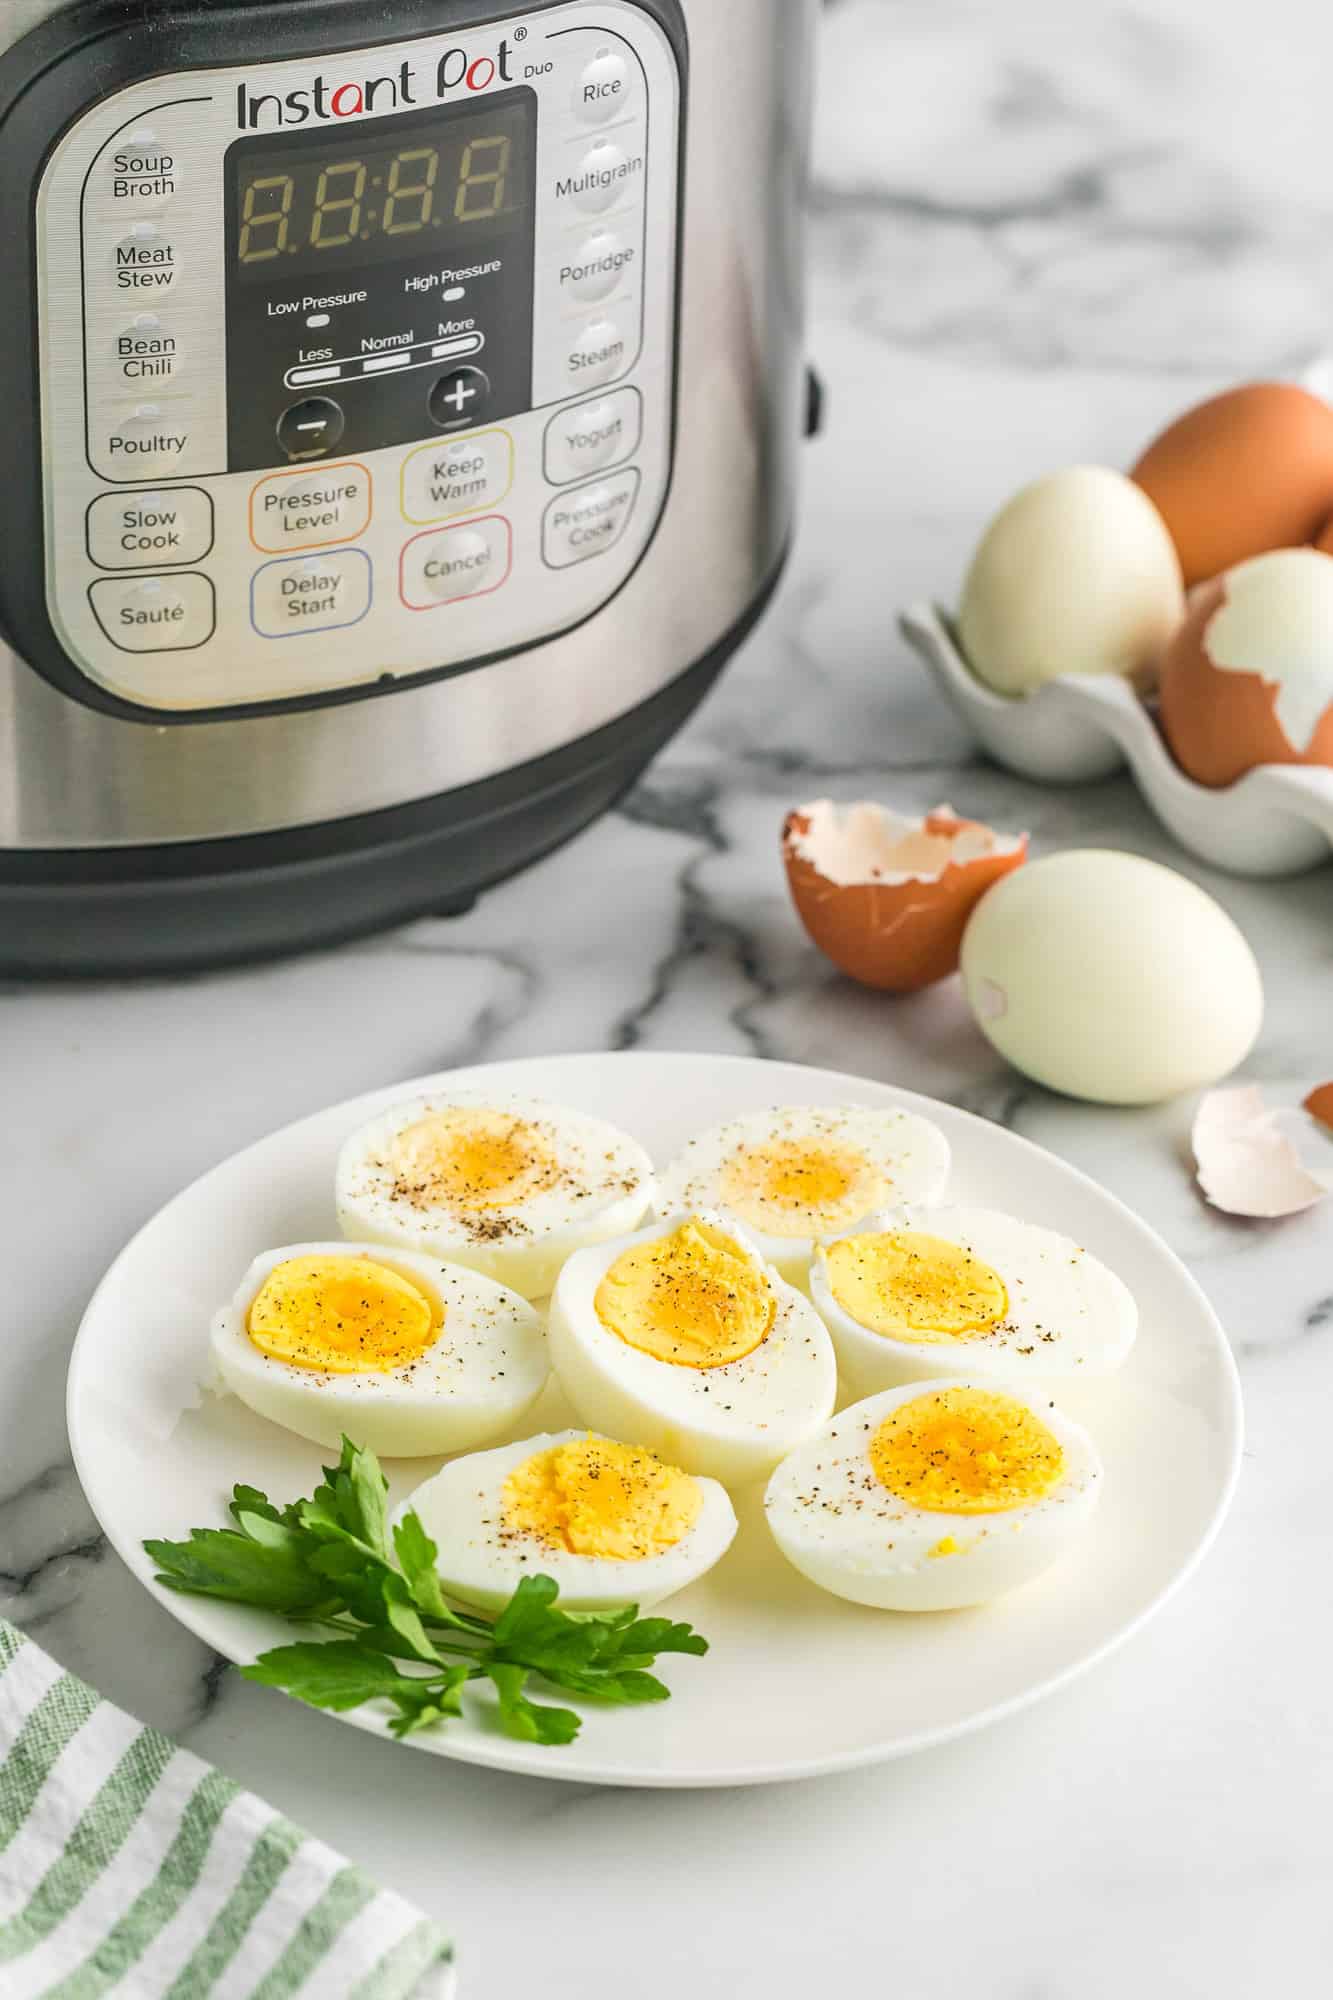 Boiled eggs on a plate in front of an instant pot pressure cooker.